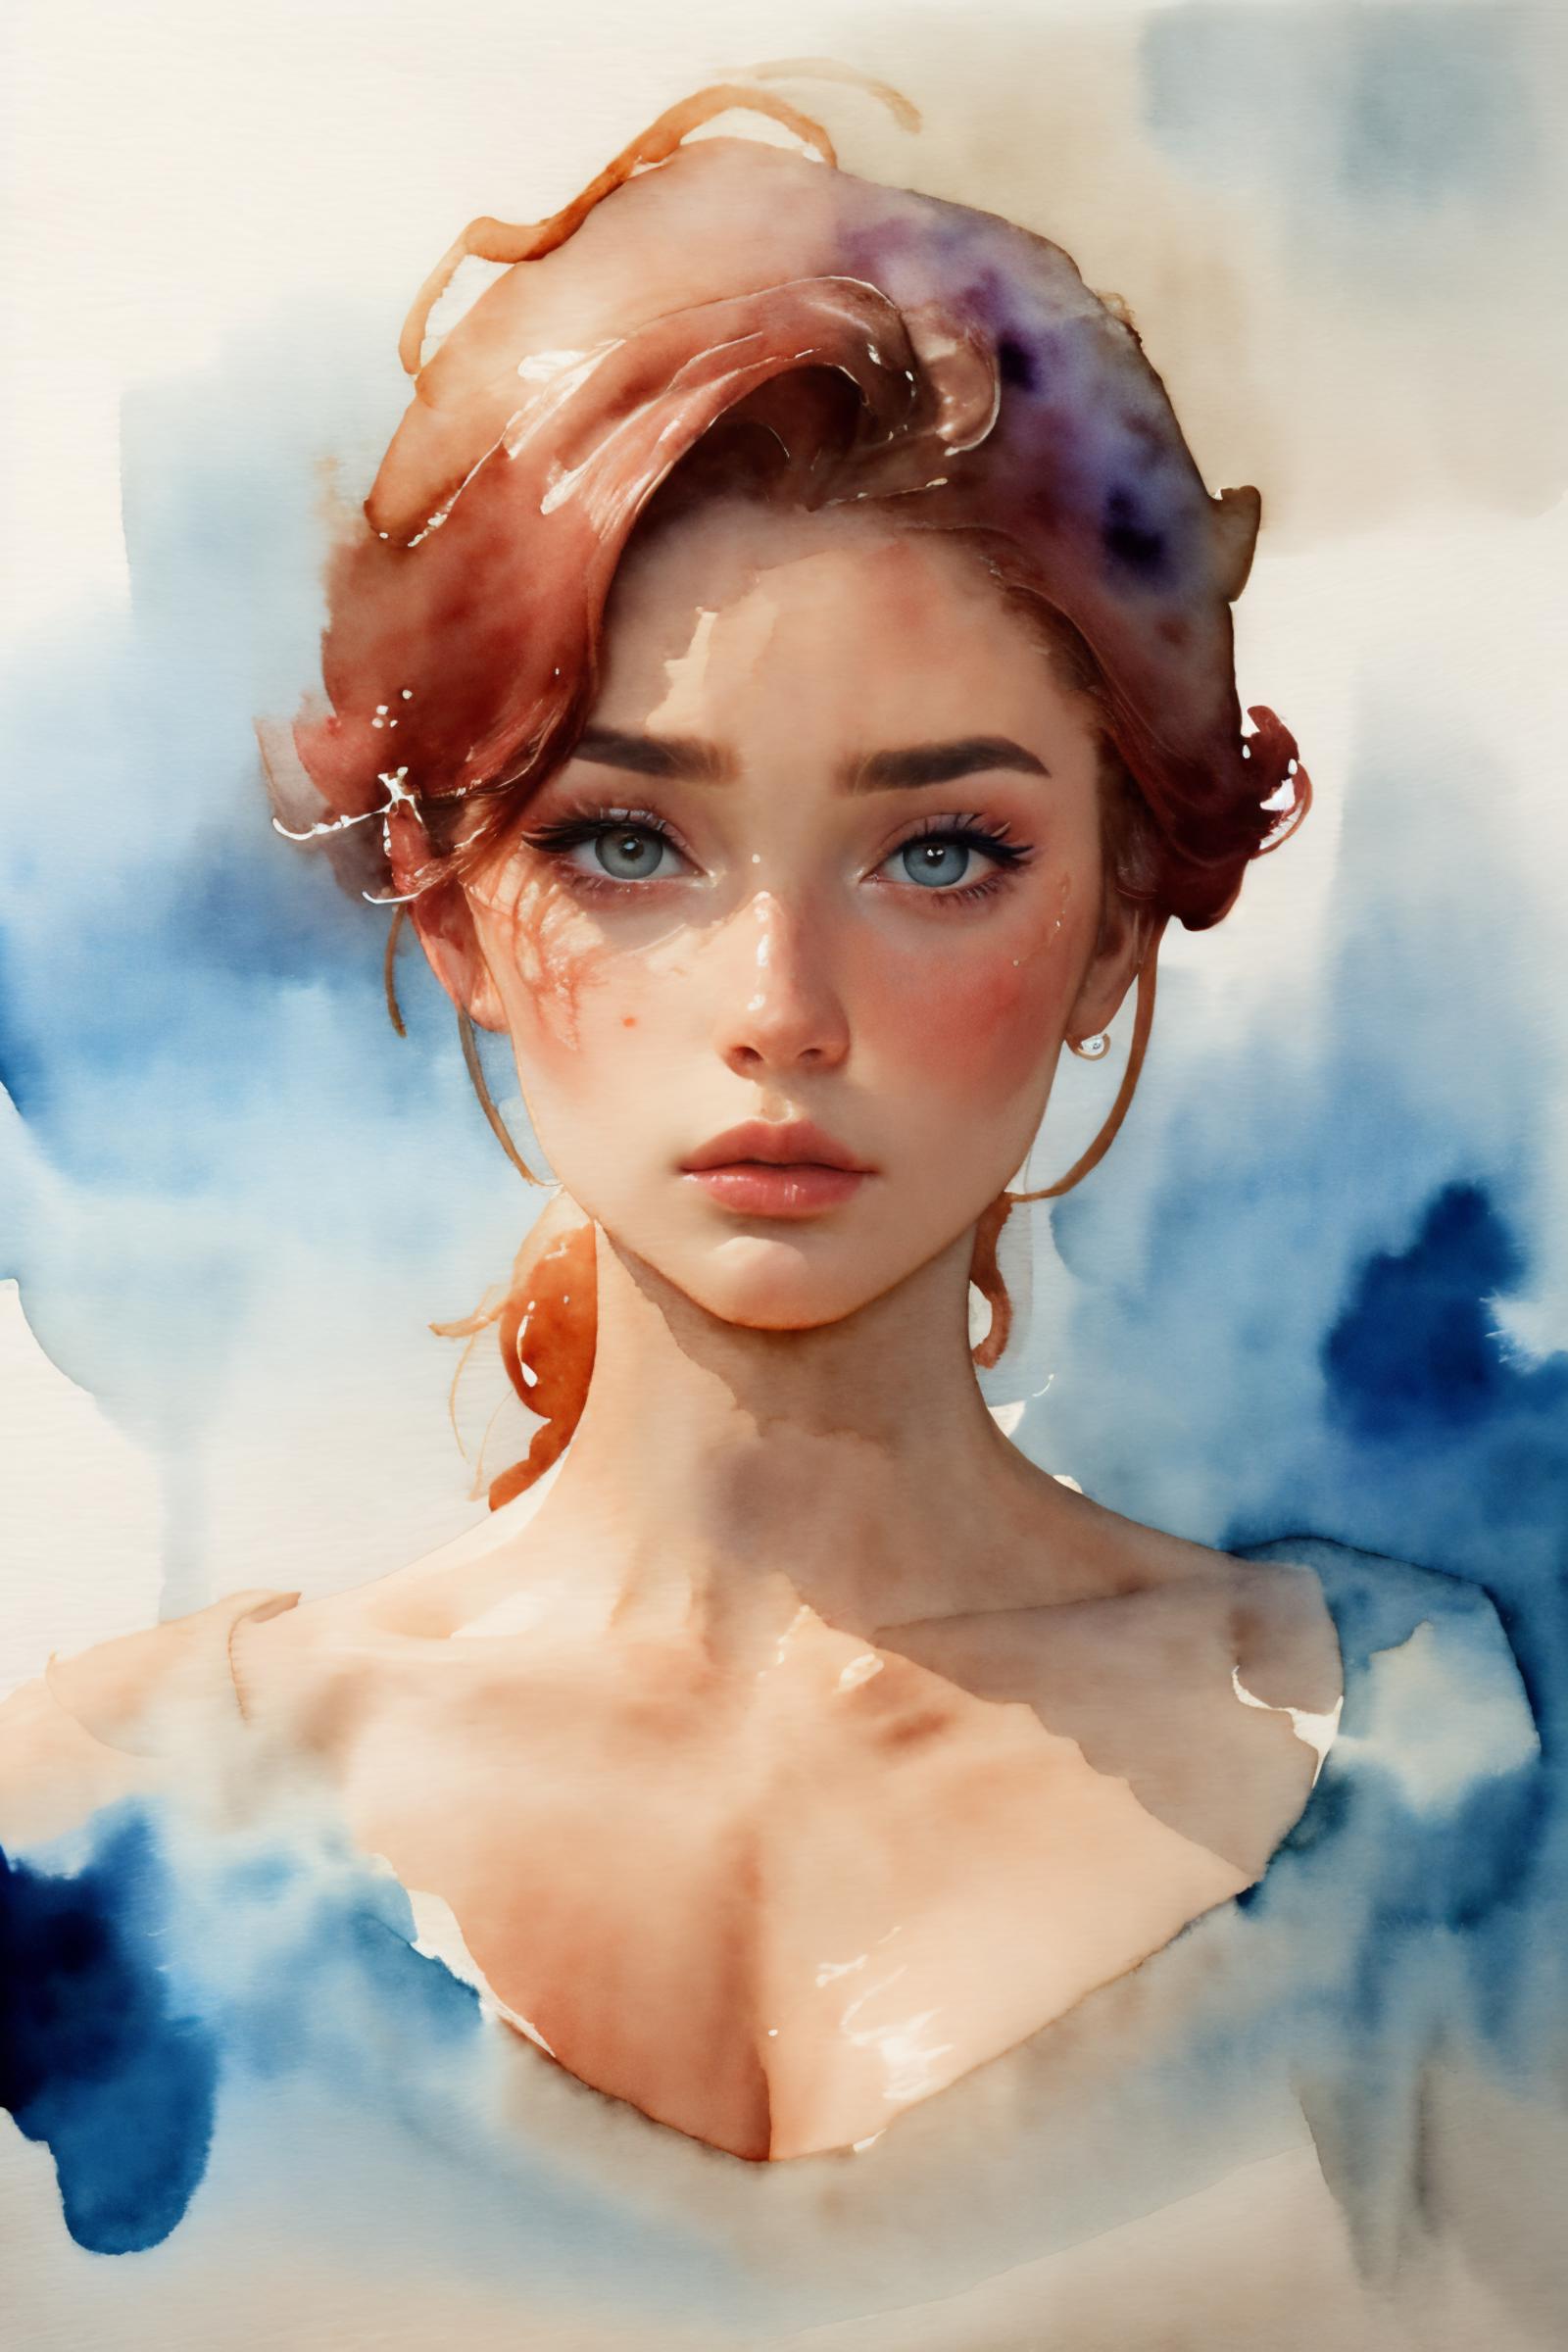 A painting of a woman with red hair and blue eyes.